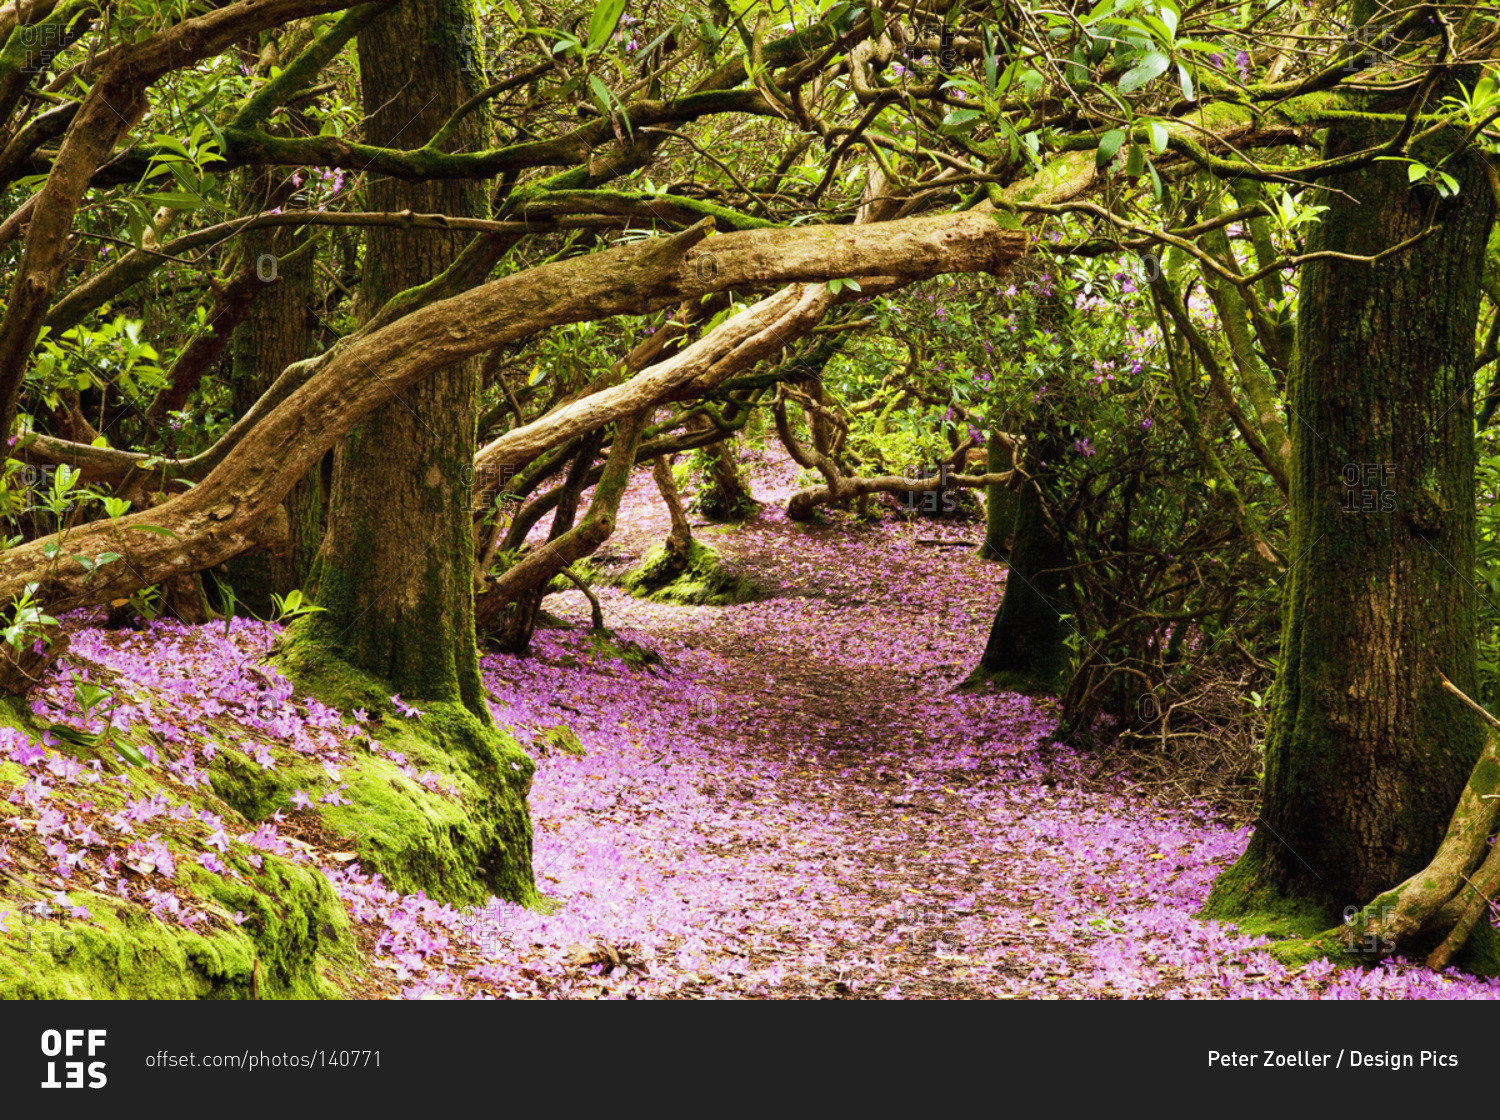 A path in a forest covered with pink flower petals, Reenagross, Kenmare, County Kerry, Ireland